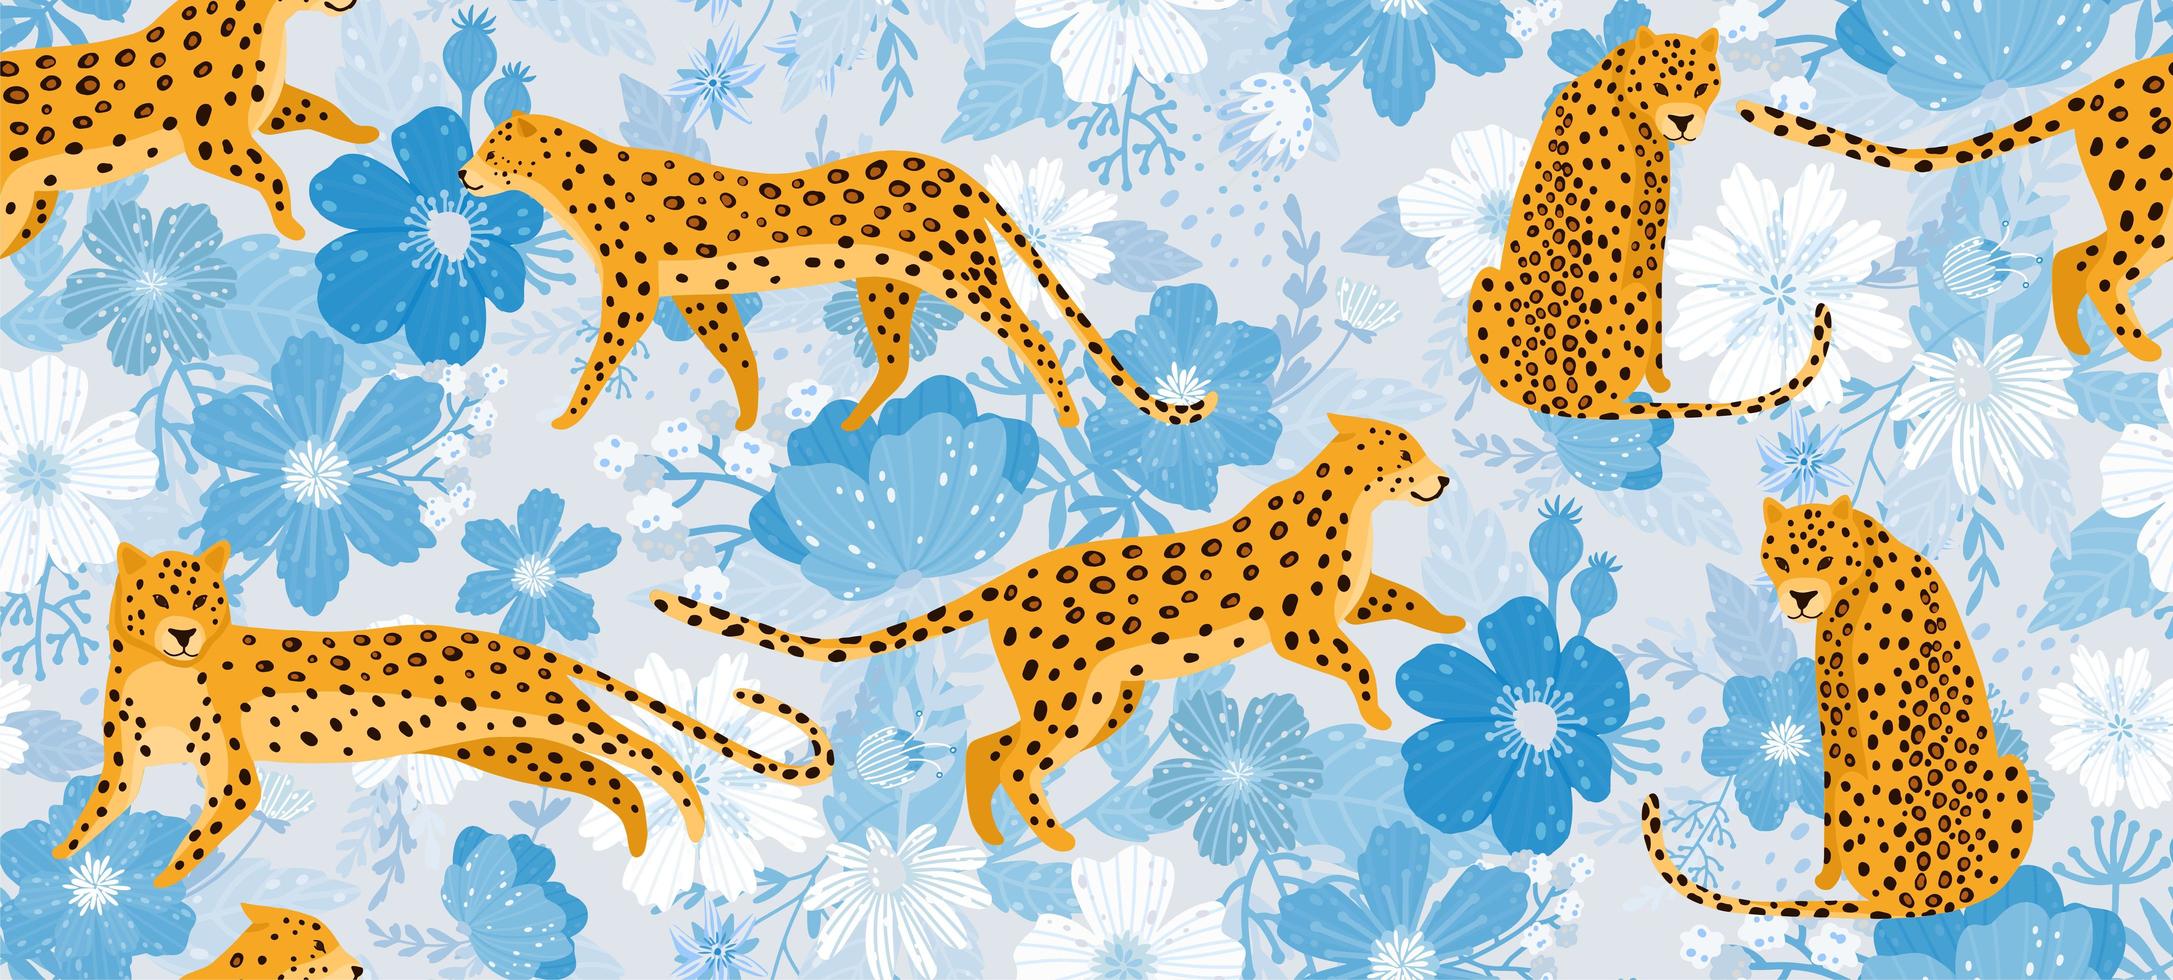 Leopards surrounded by bluel flowers seamless pattern vector